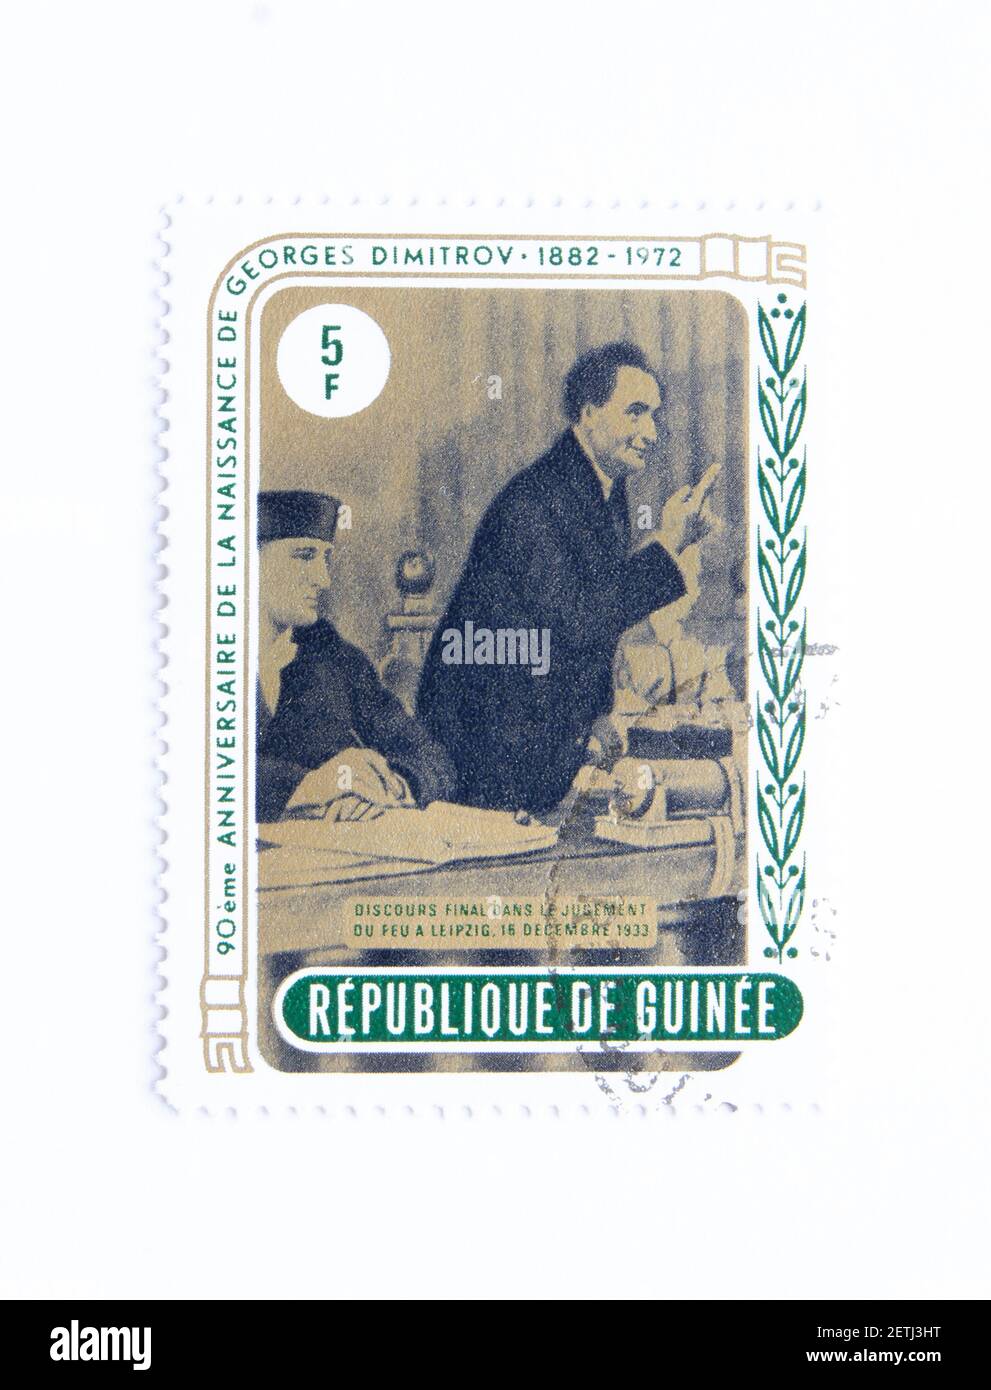 Guinea Republic Postage Stamp. circa 1972. 90th anniversary of Georgi Dimitrov's birth. founder of communist rule and first bulgarian prime minister. Stock Photo